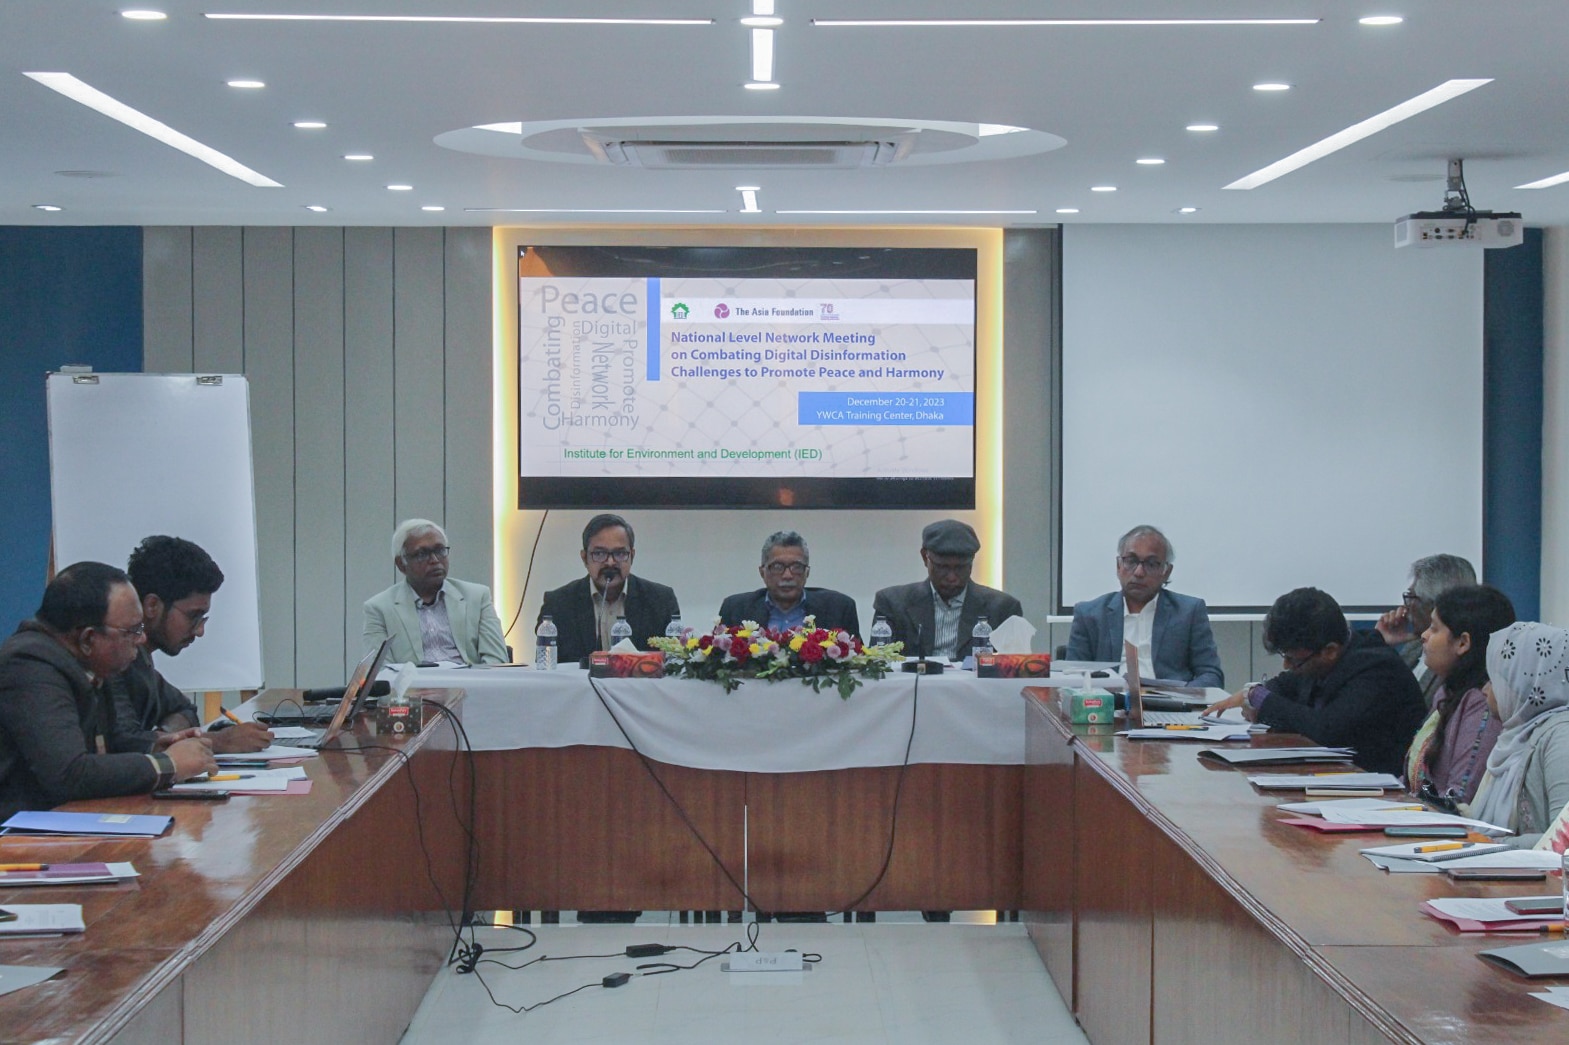 Members of various Bangladeshi organizations sit at one side open rectangular table. The camera faces the members and a screen noting the meetings formal title.